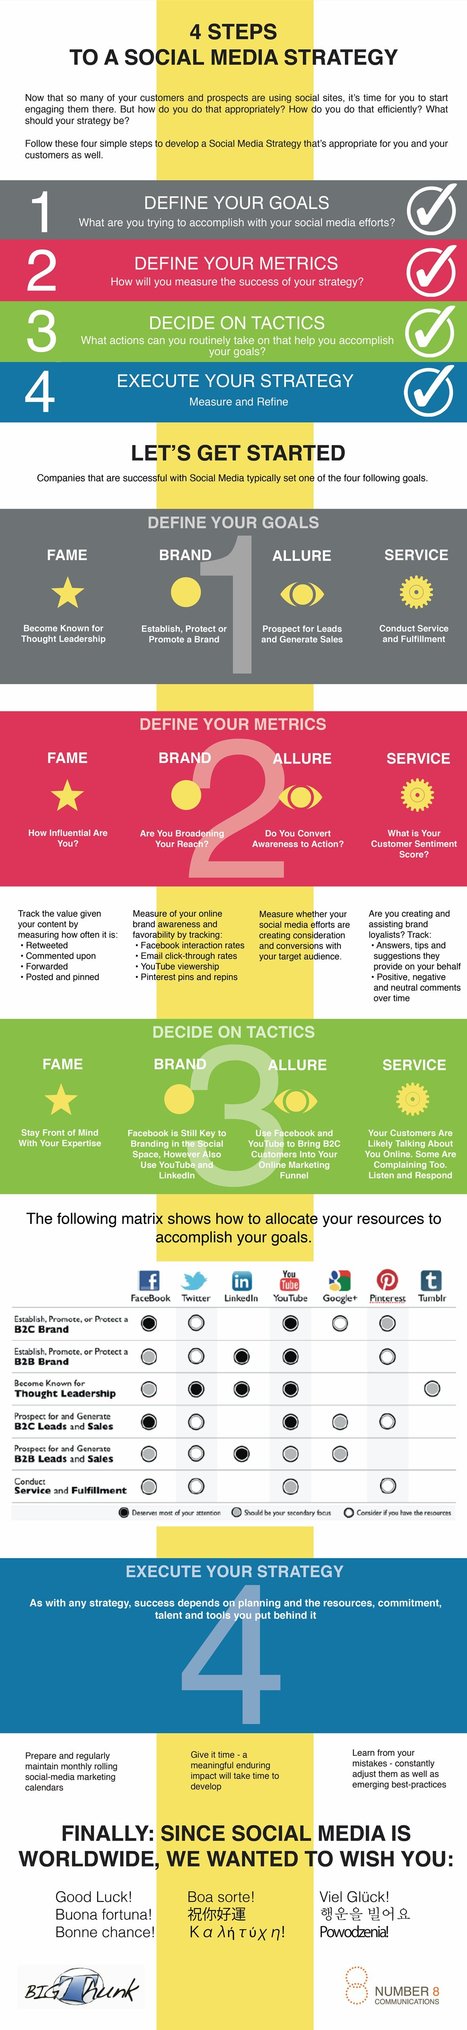 Four Steps to a Social Media Strategy [Infographic] | Time to Learn | Scoop.it